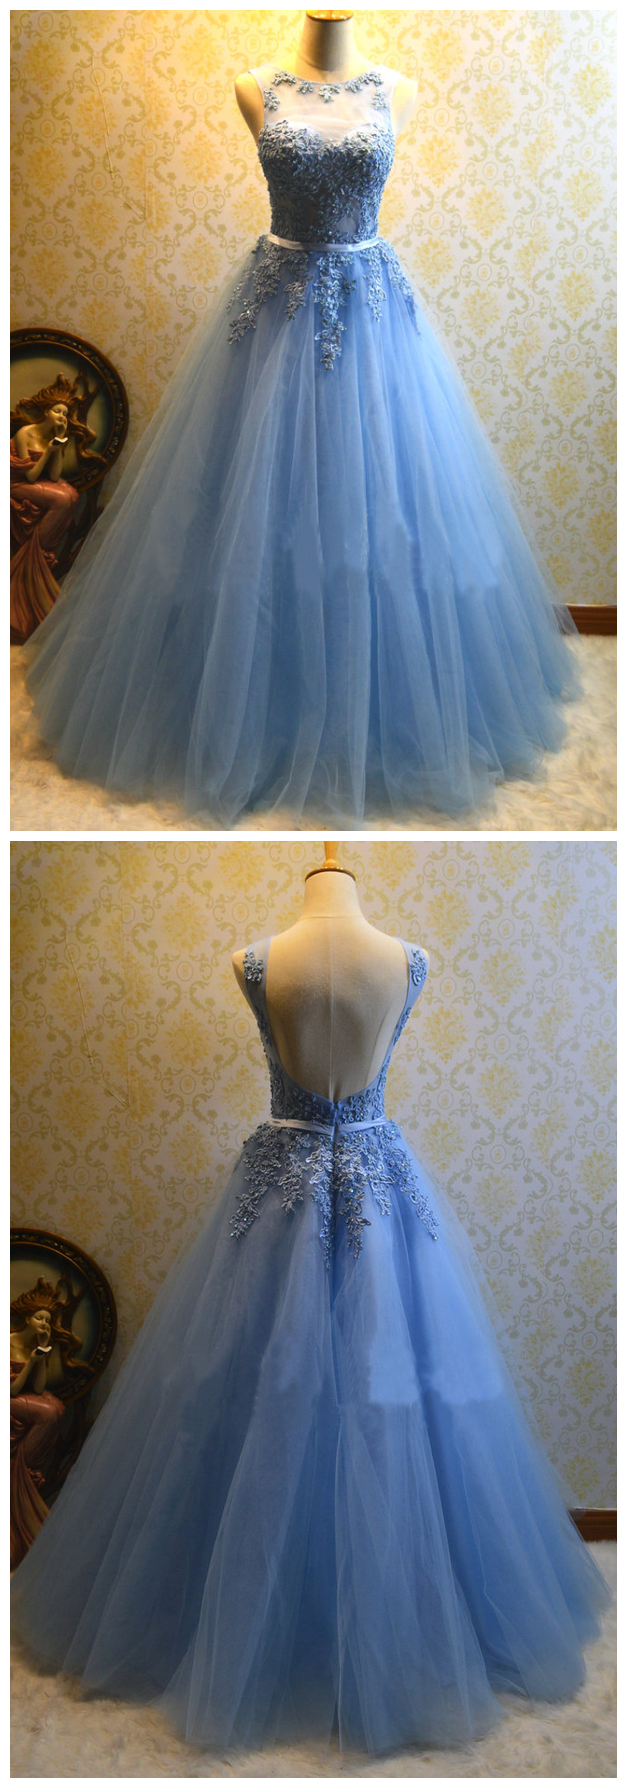 Ball Gown Blue Prom Dress,tulle Appliques Prom Dresses,long Quinceanera Dresses